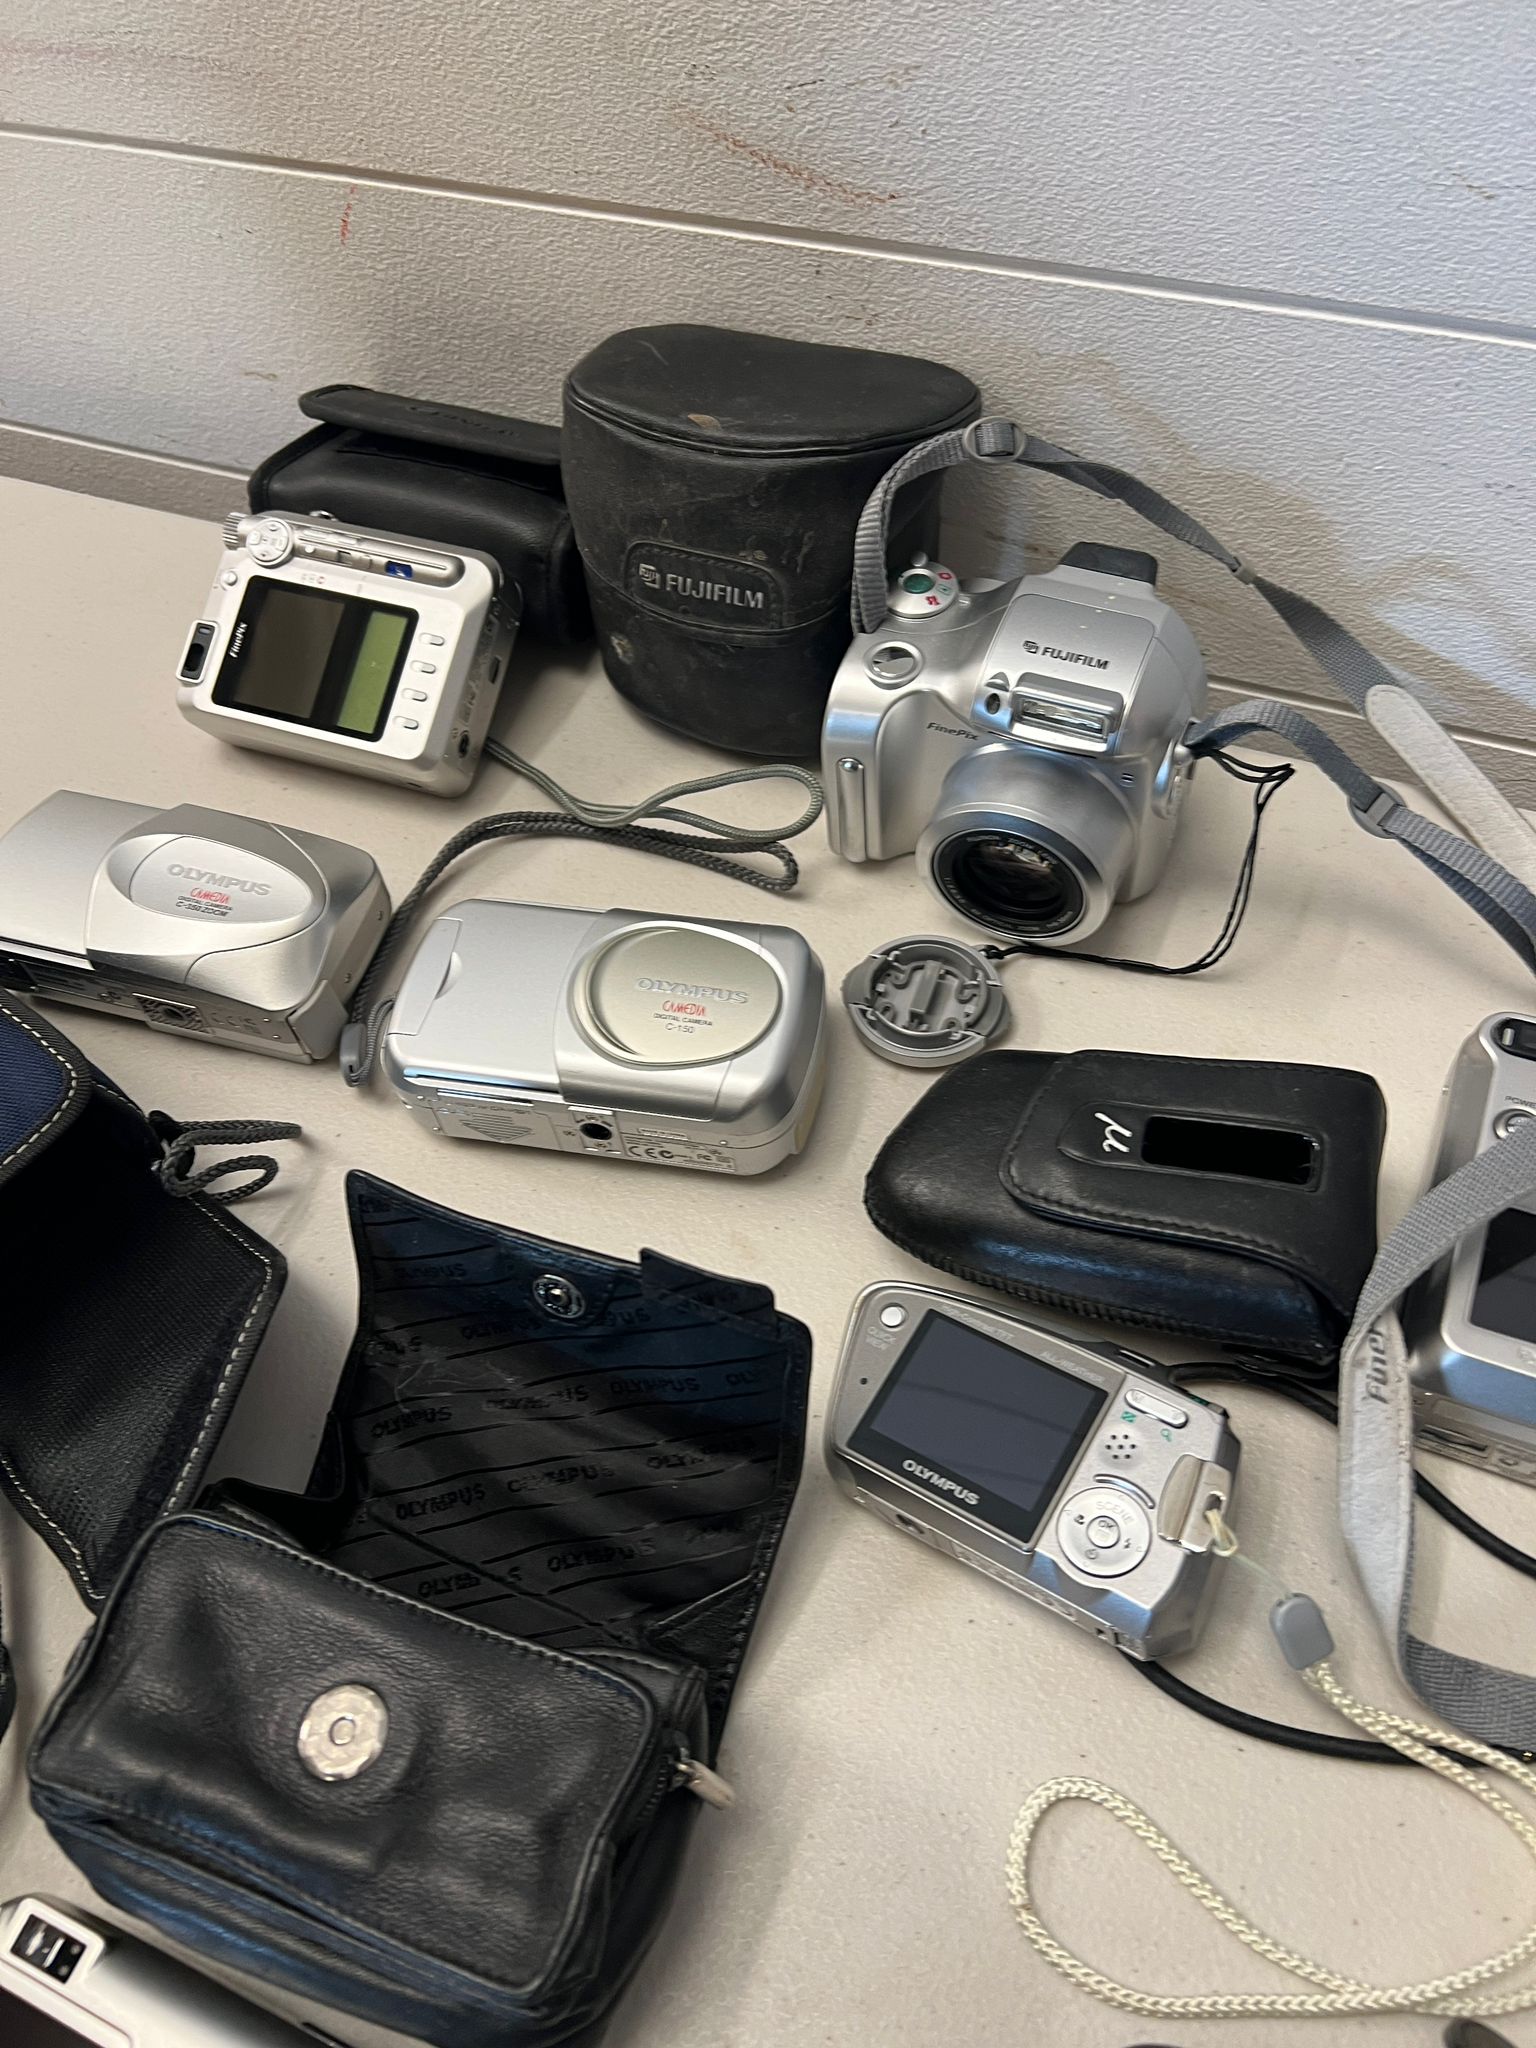 A collection of compac cameras including Sony, Olympus, Fujifilm etc - Image 4 of 5